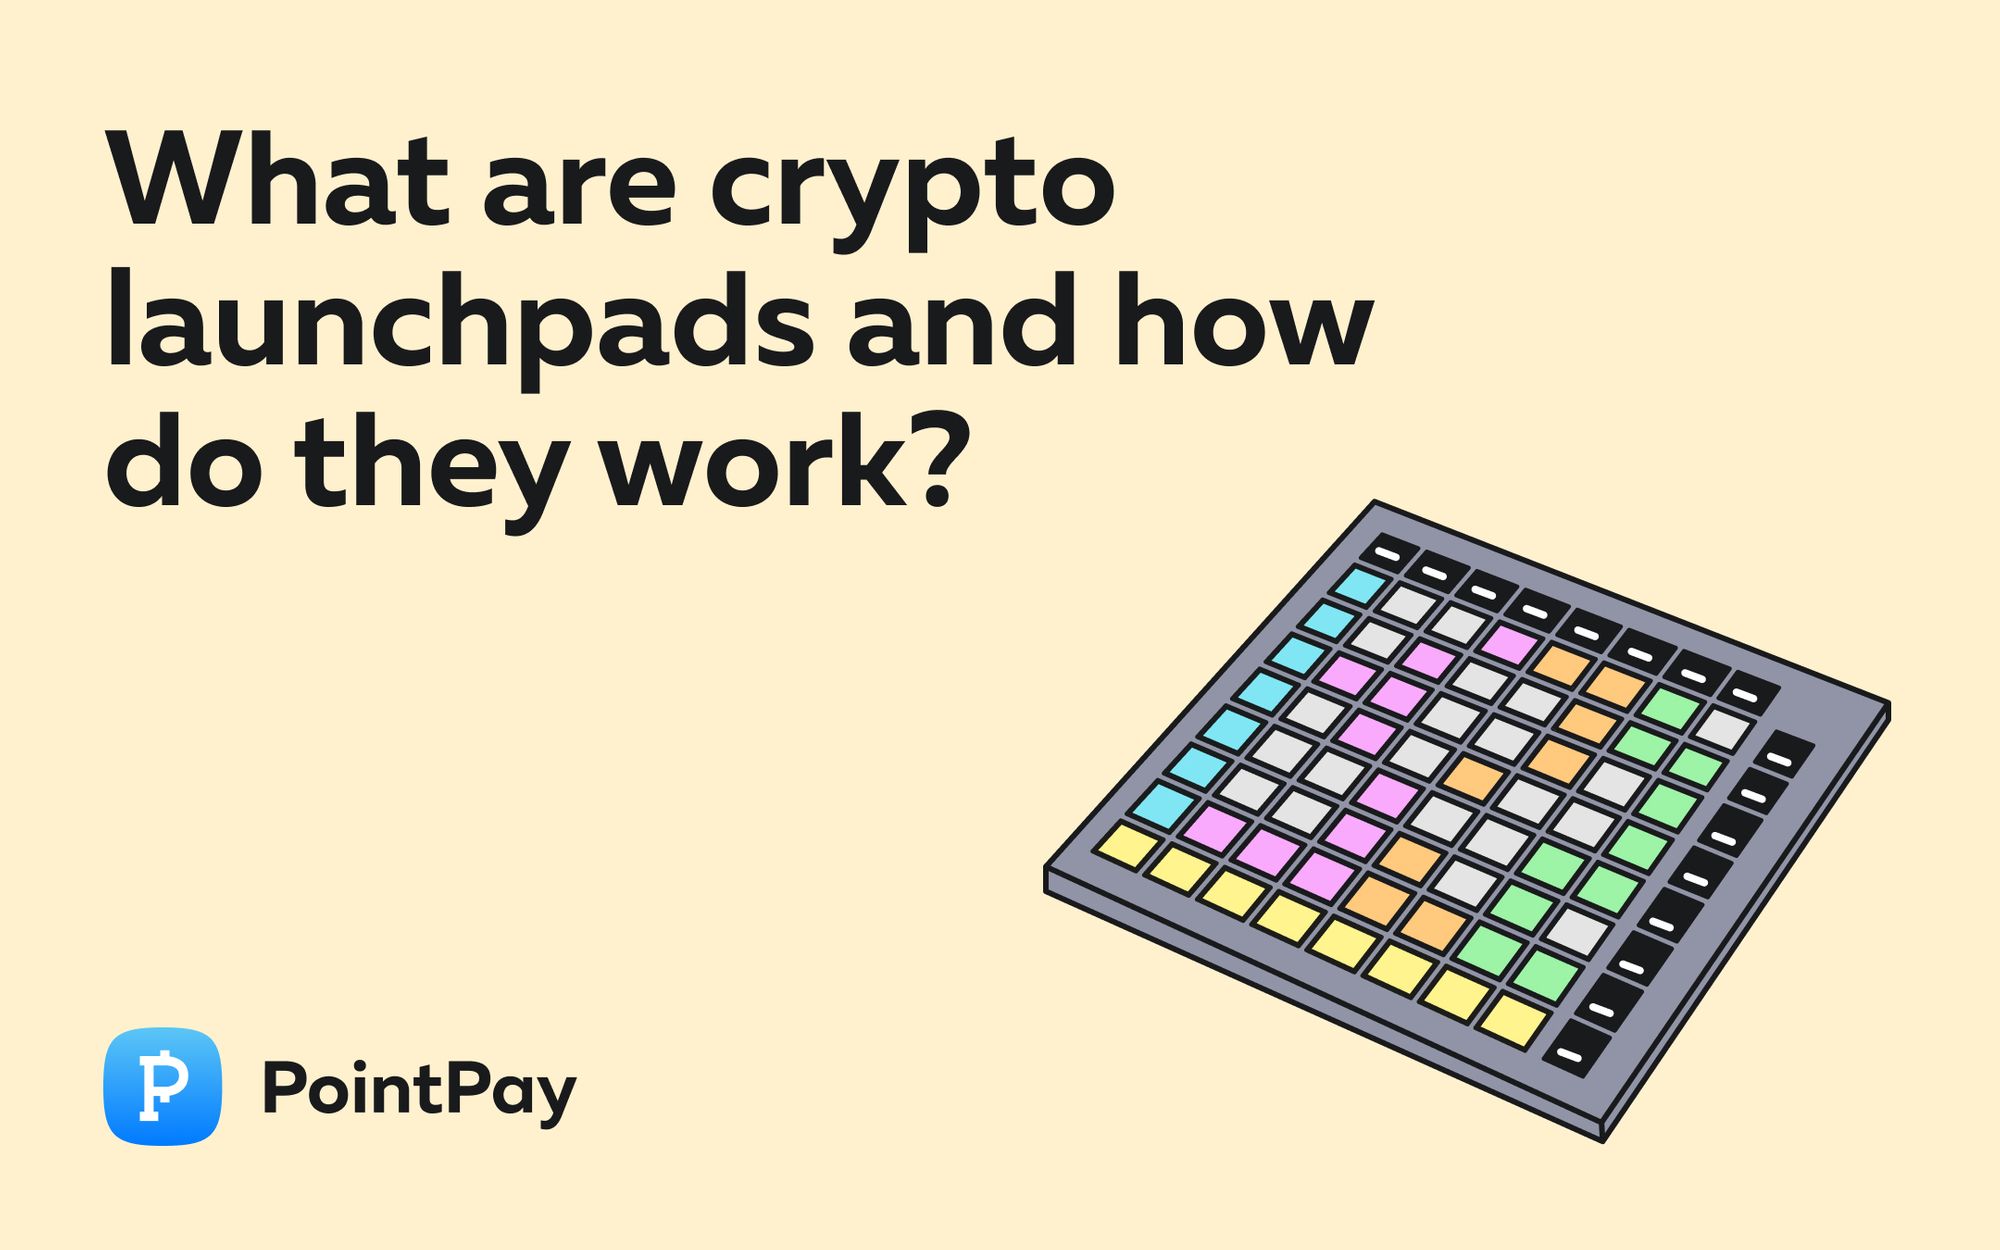 What Are Crypto Launchpads and How Do They Work?